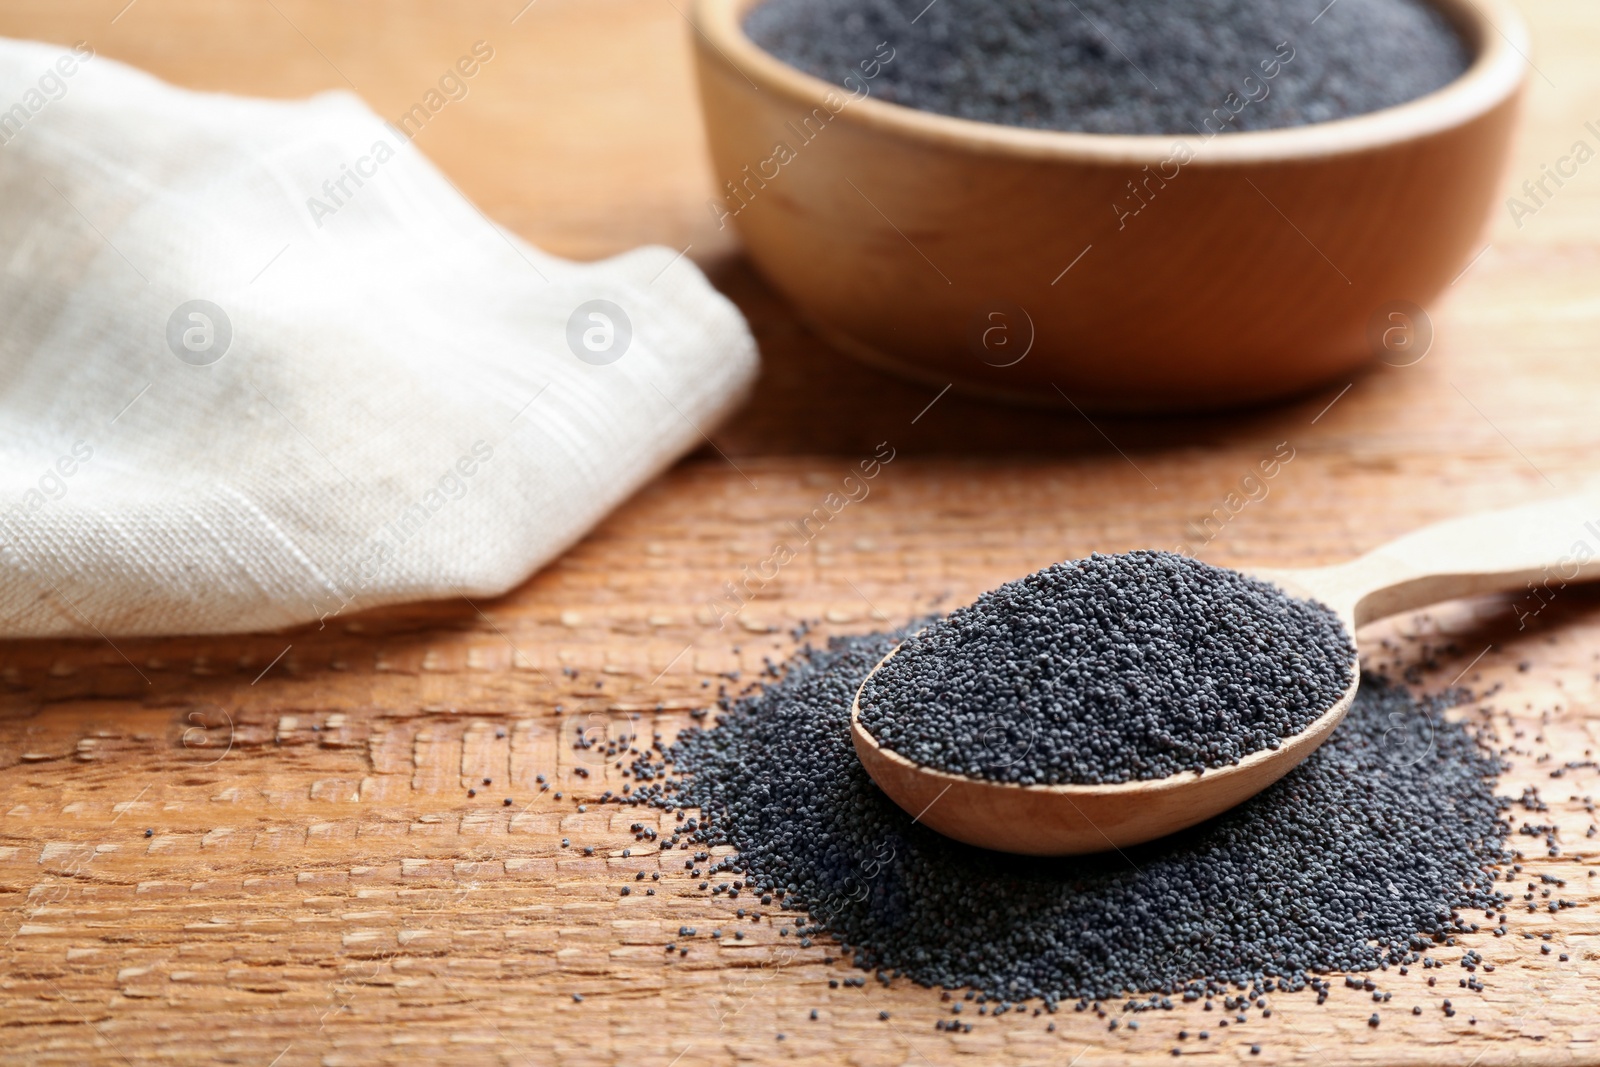 Photo of Poppy seeds and spoon on wooden table